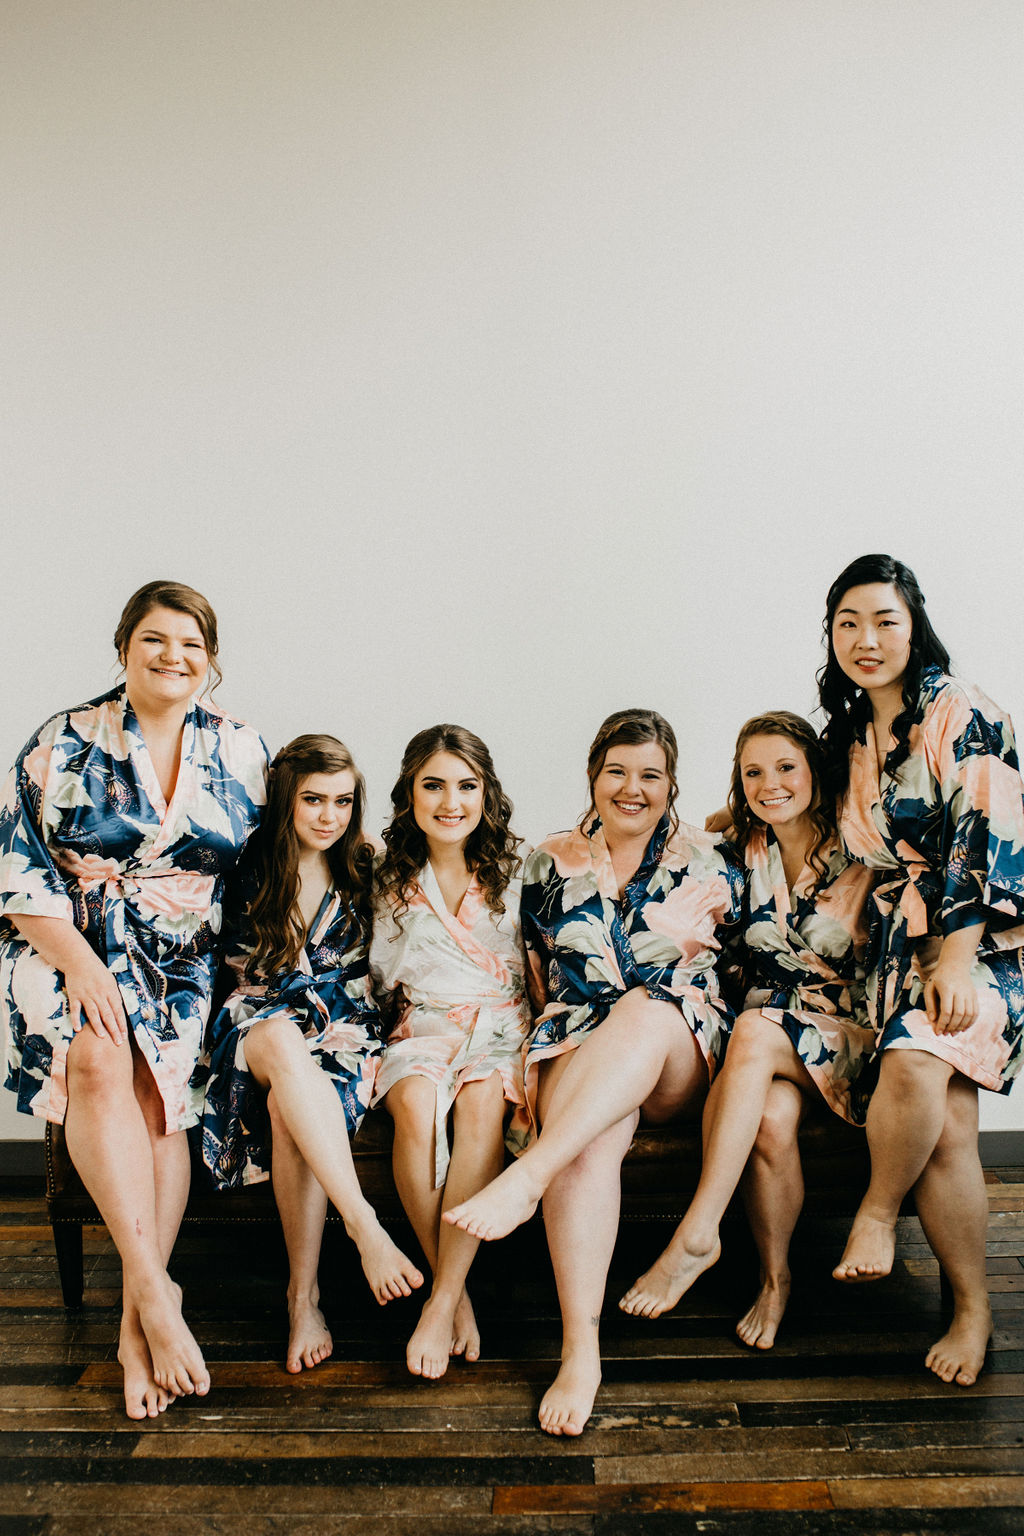 Bridesmaids getting ready before a wedding day